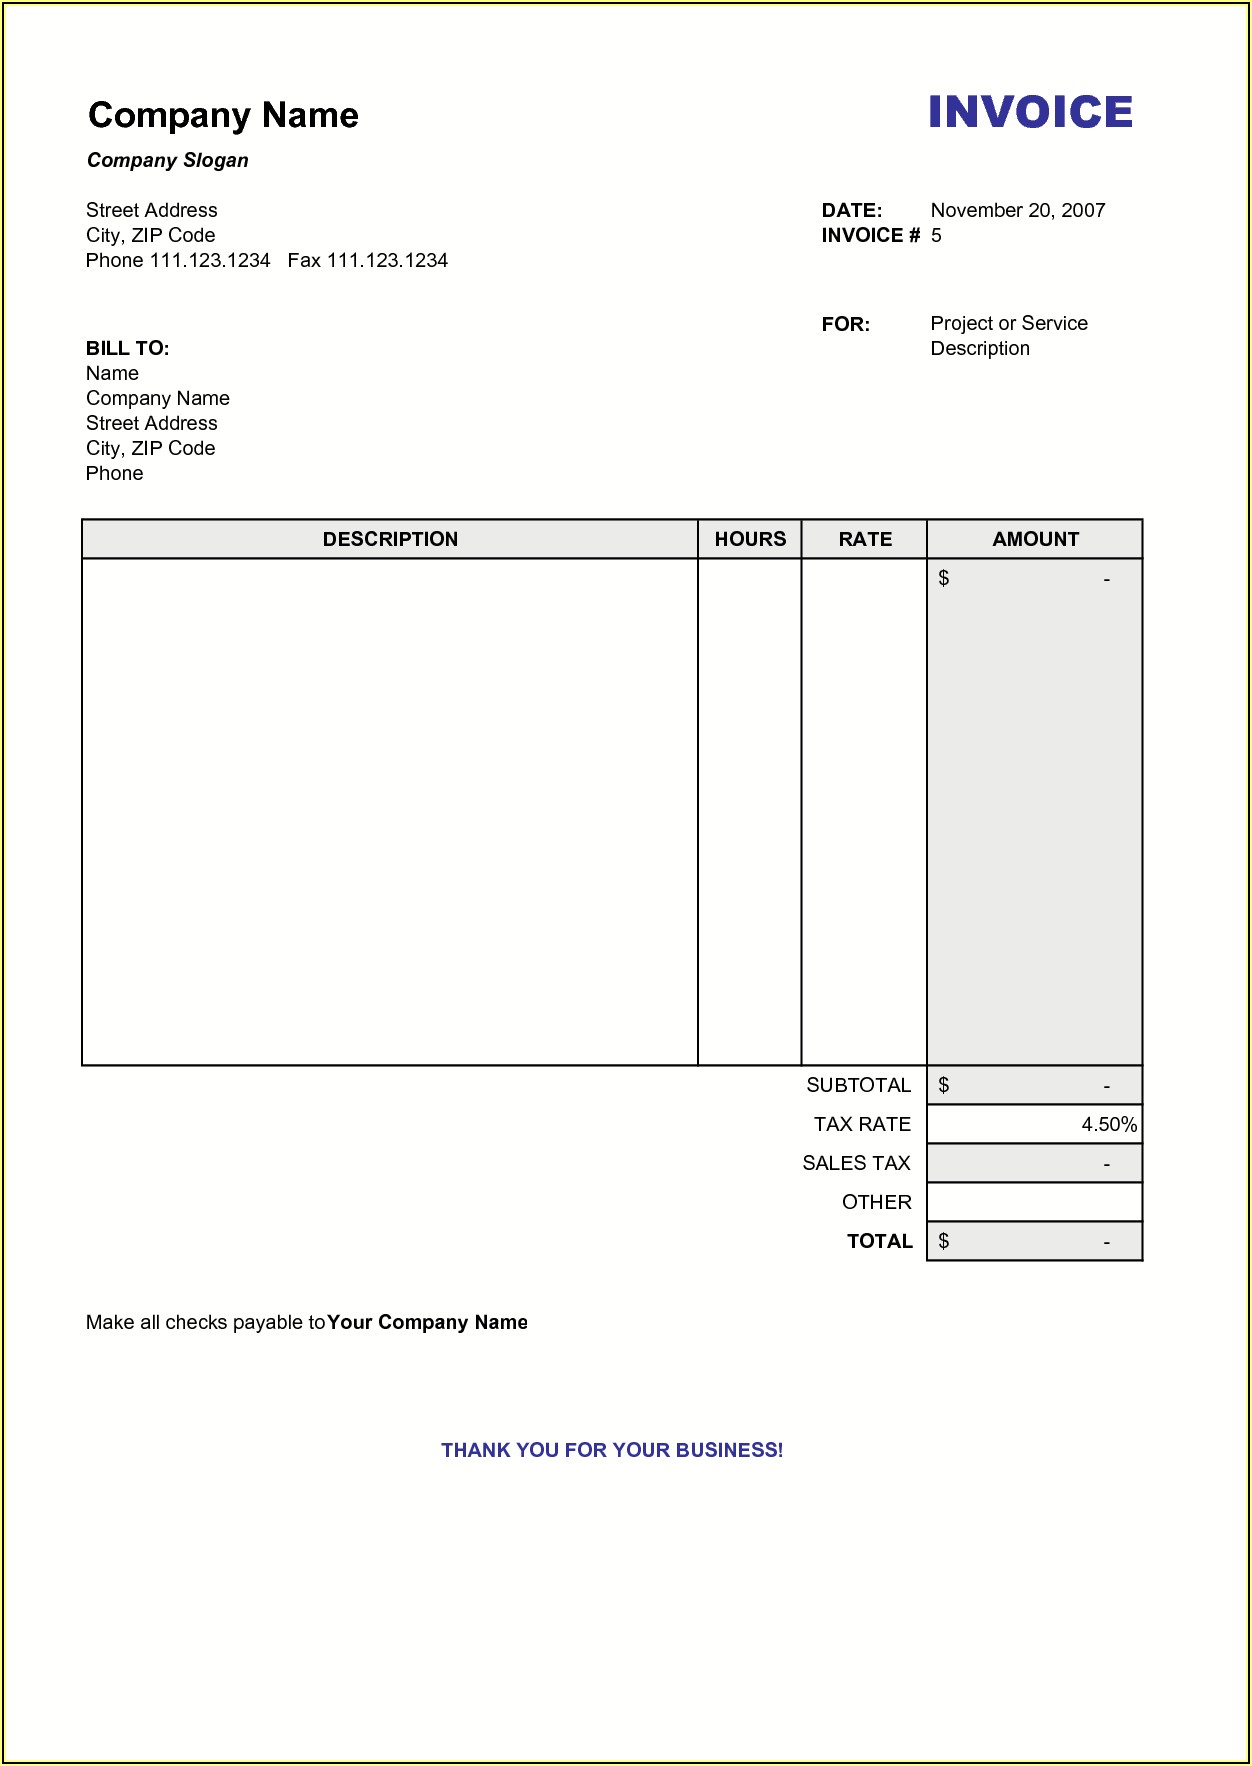 Invoice Format In Word